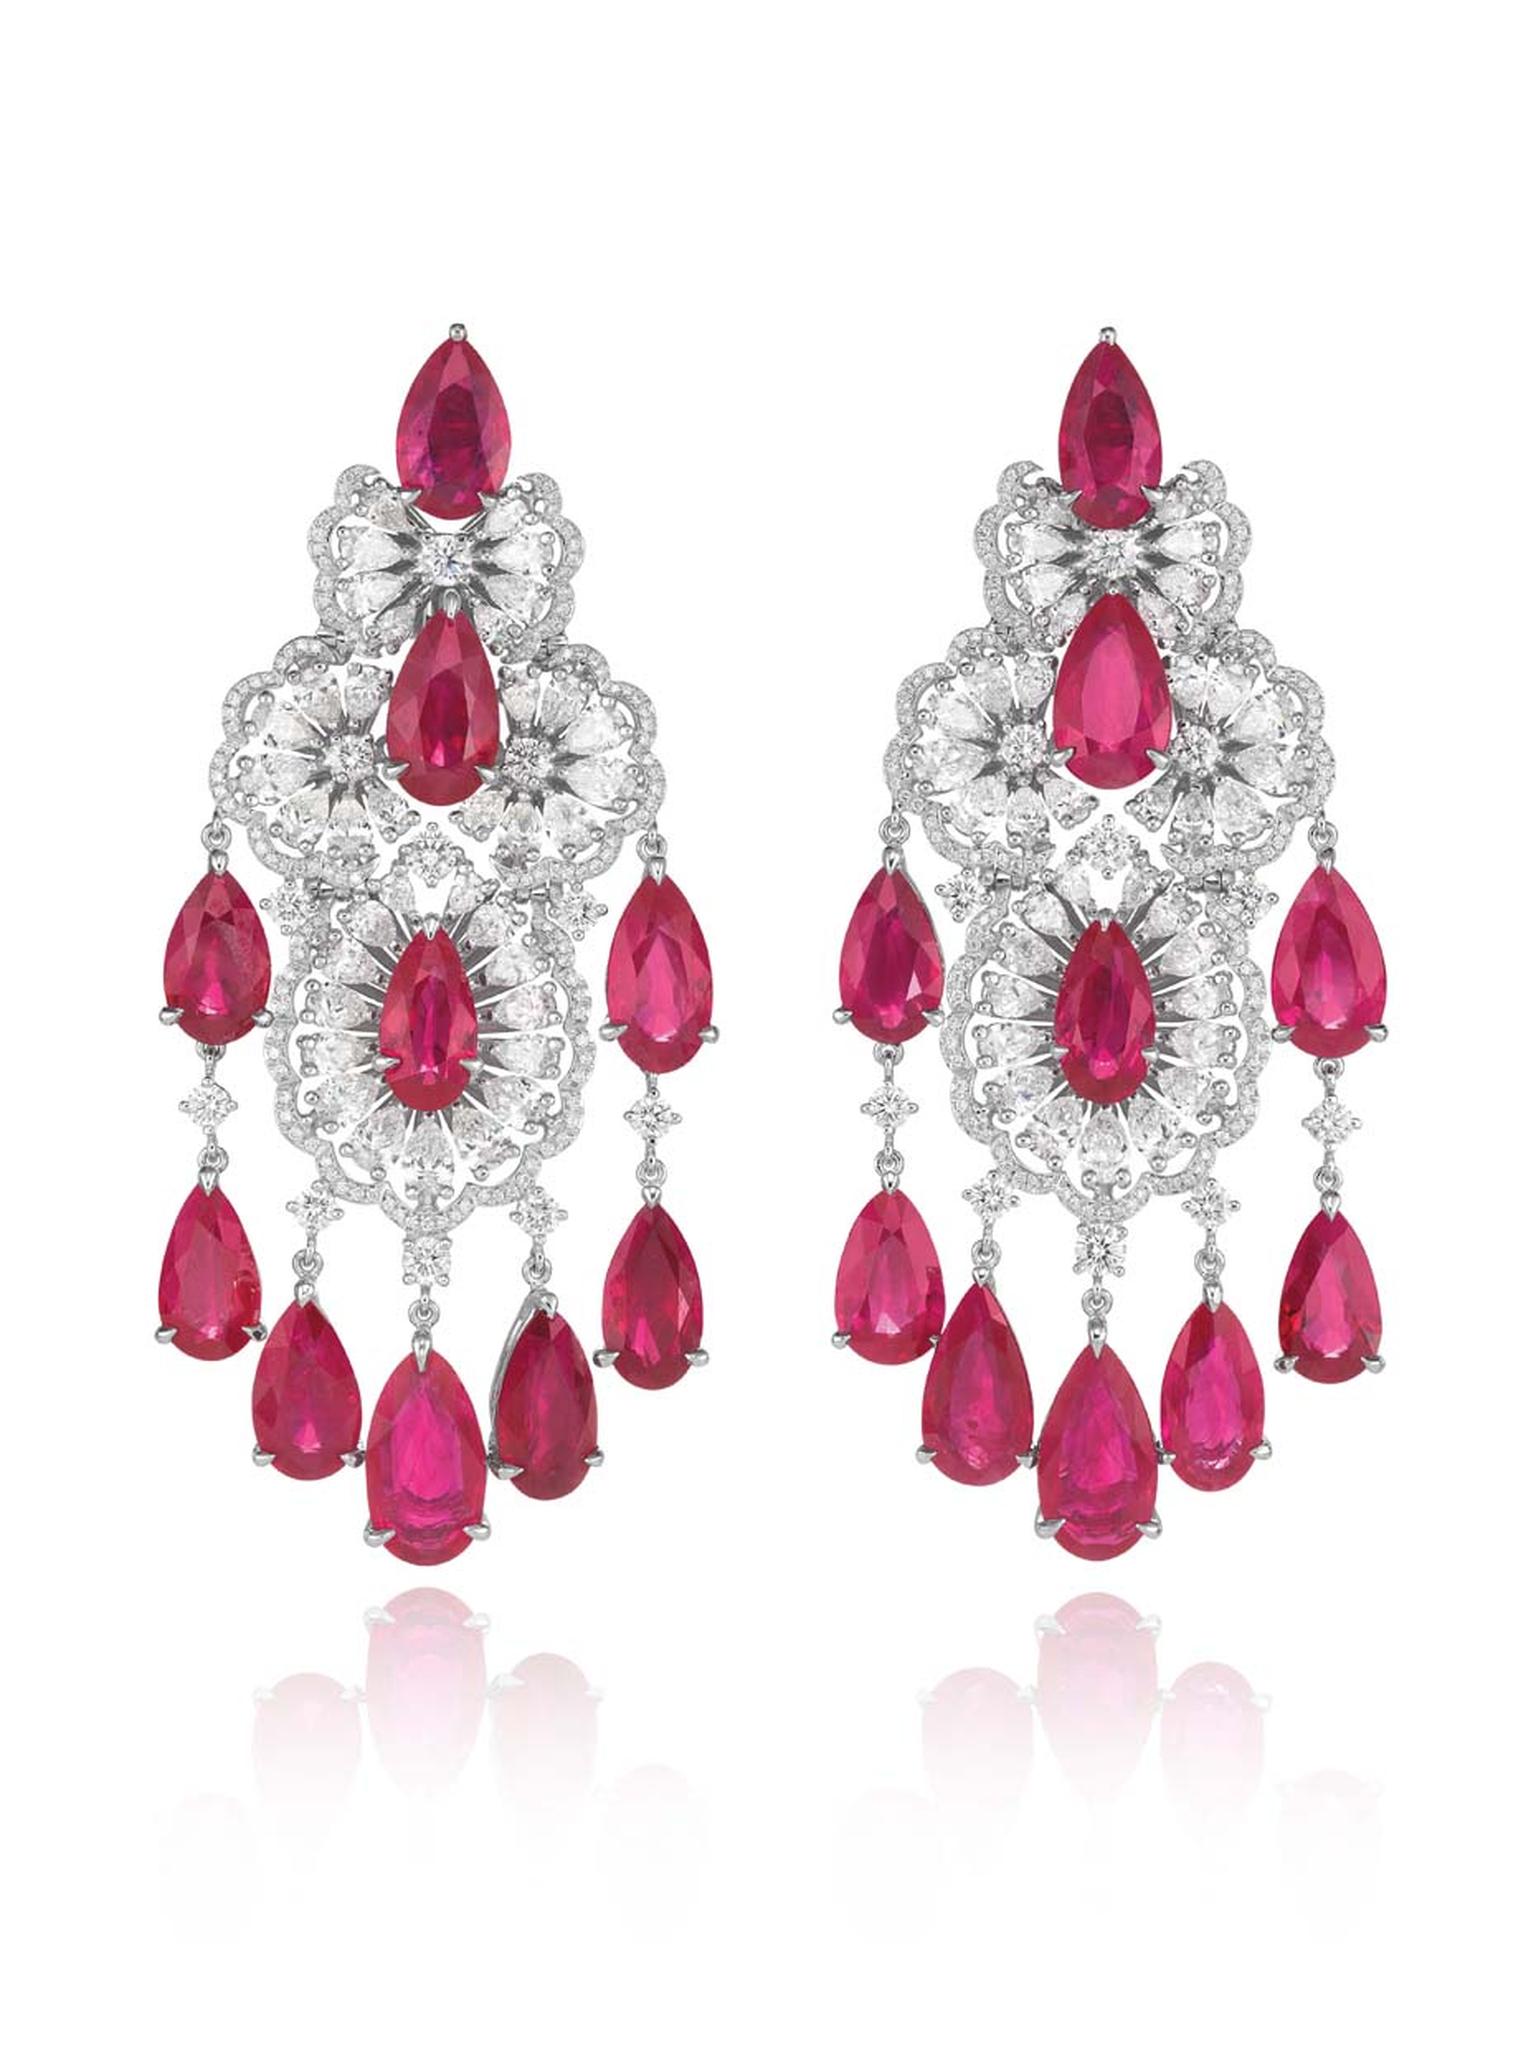 Chopard ruby and diamond earrings from the Haute Joaillerie collection.